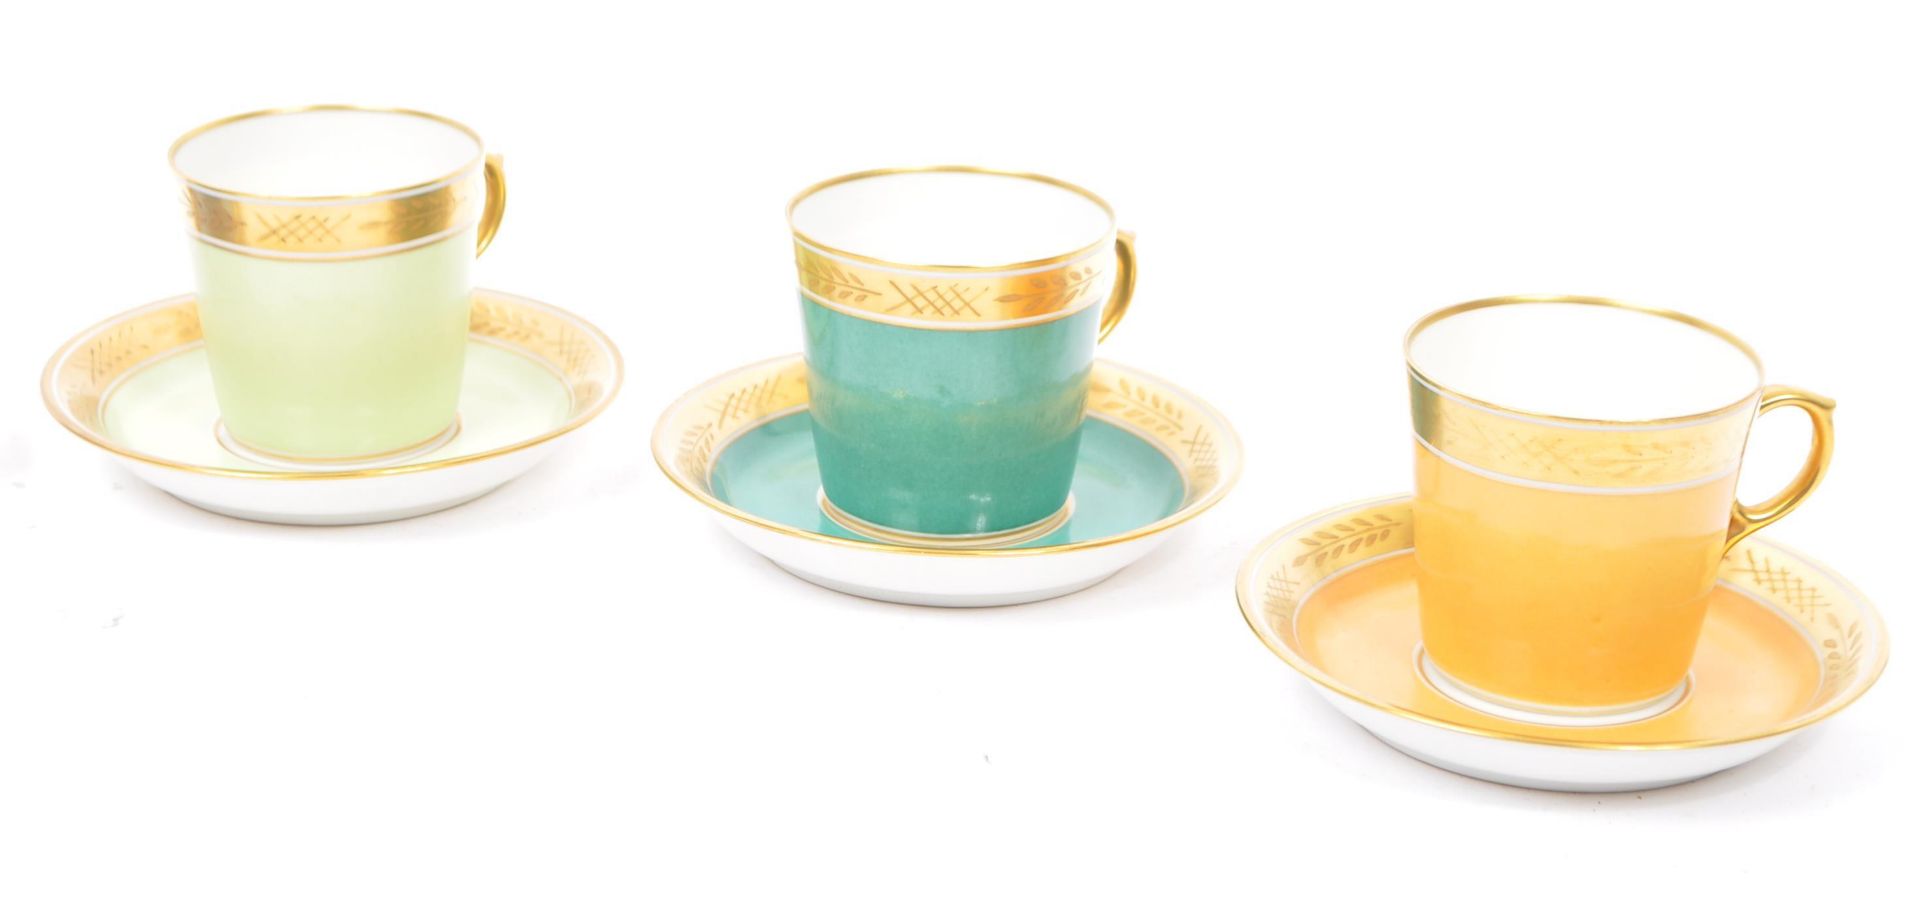 EARLY 20TH CENTURY ROYAL COPENHAGEN CUPS & SAUCERS - Image 3 of 5